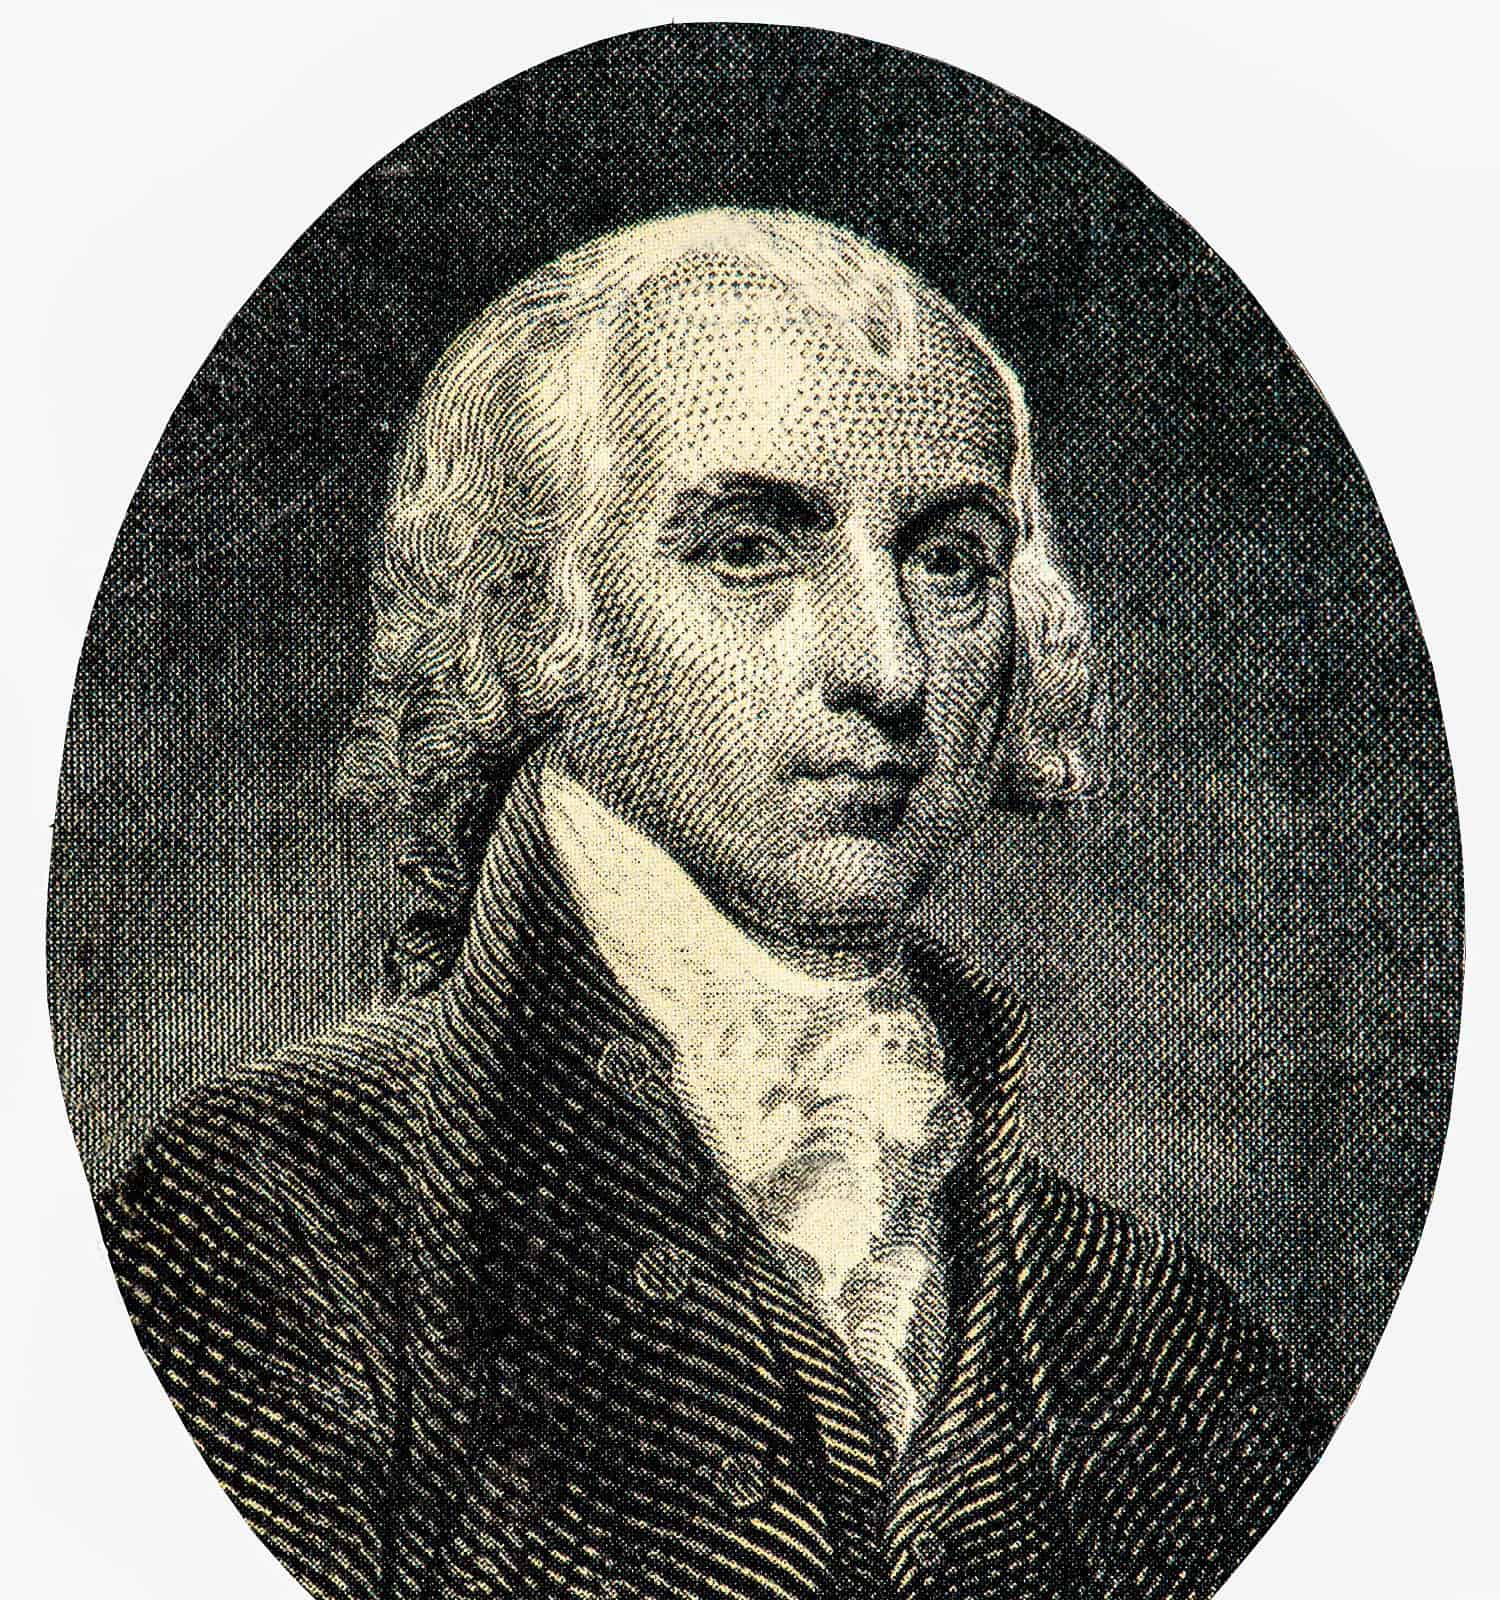 James Madison (1751-1836) who served as the 4th President of the United States. Portrait from James Madison on United States of America Dollars Banknotes. was a founding father of the United States